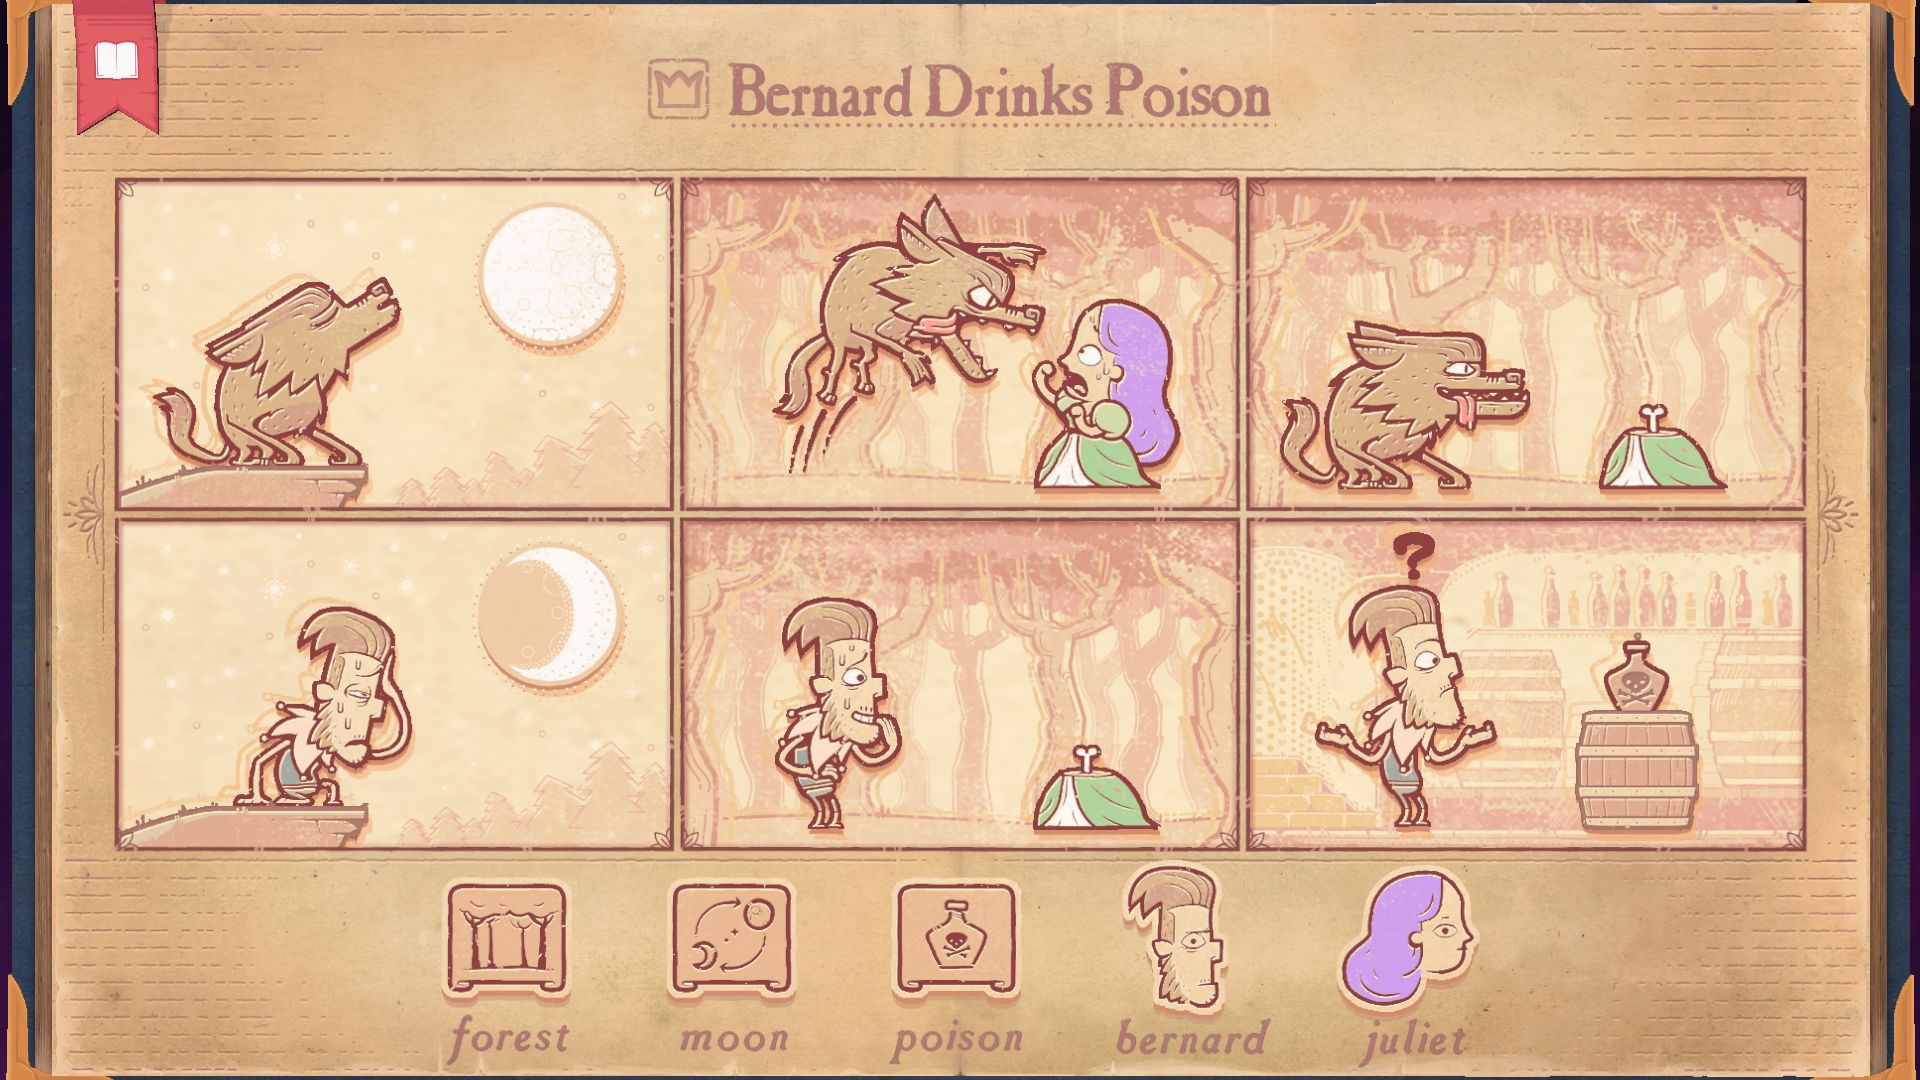 A story in the puzzle game Storyteller in which a man called Bernard has turned into a werewolf, eaten a woman in the forest, turned back into a man, and then been kind of ambivalent about it - the player has got the story wrong